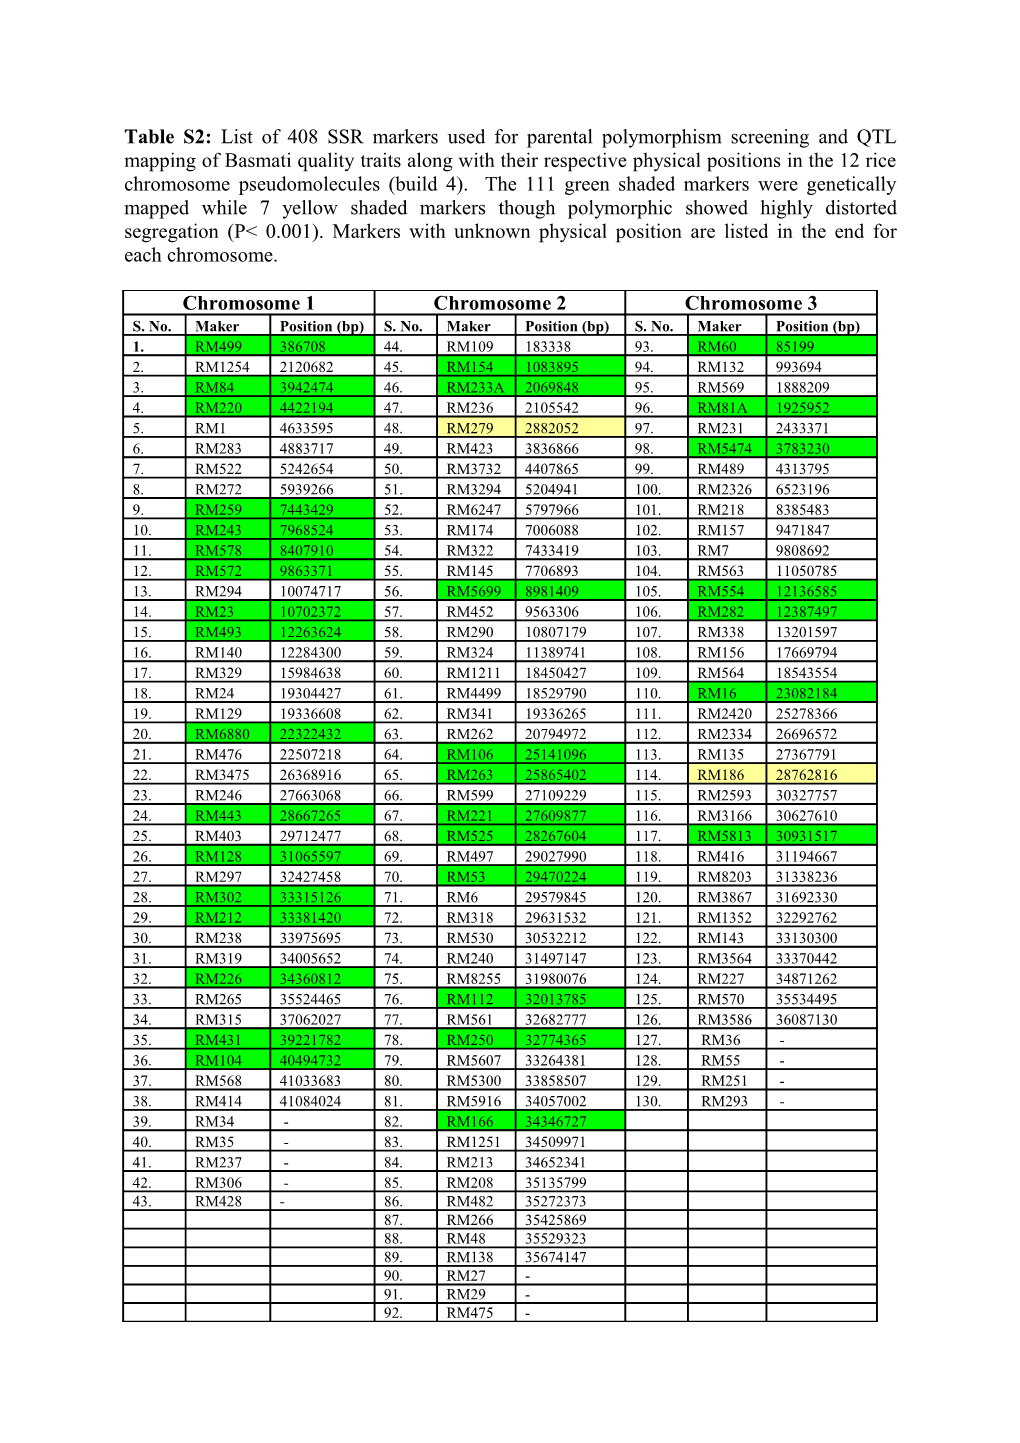 Table S2: List of 408 SSR Markers Used for Parental Polymorphism Screening and QTL Mapping